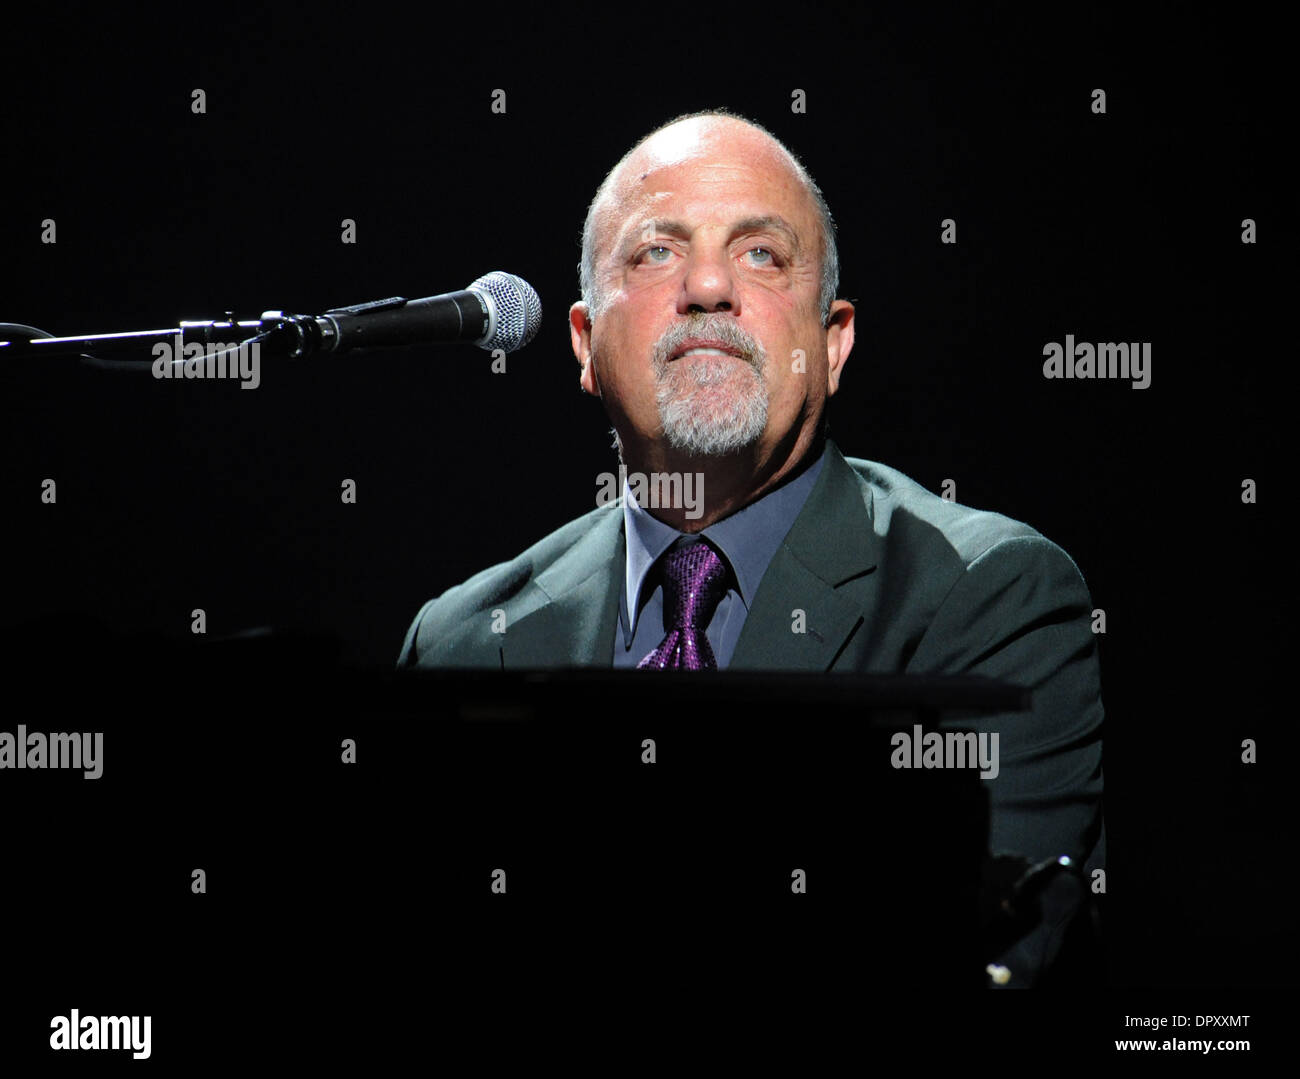 Mar 07, 2009 - Charlotte, North Carolina, USA - Musician BILLY JOEL performs live as his 2009 Face 2 Face tour with Elton John makes a stop to a sold out audience at The Time Warner Cable Arena located in downtown Charlotte. (Credit Image: © Jason Moore/ZUMA Press) Stock Photo